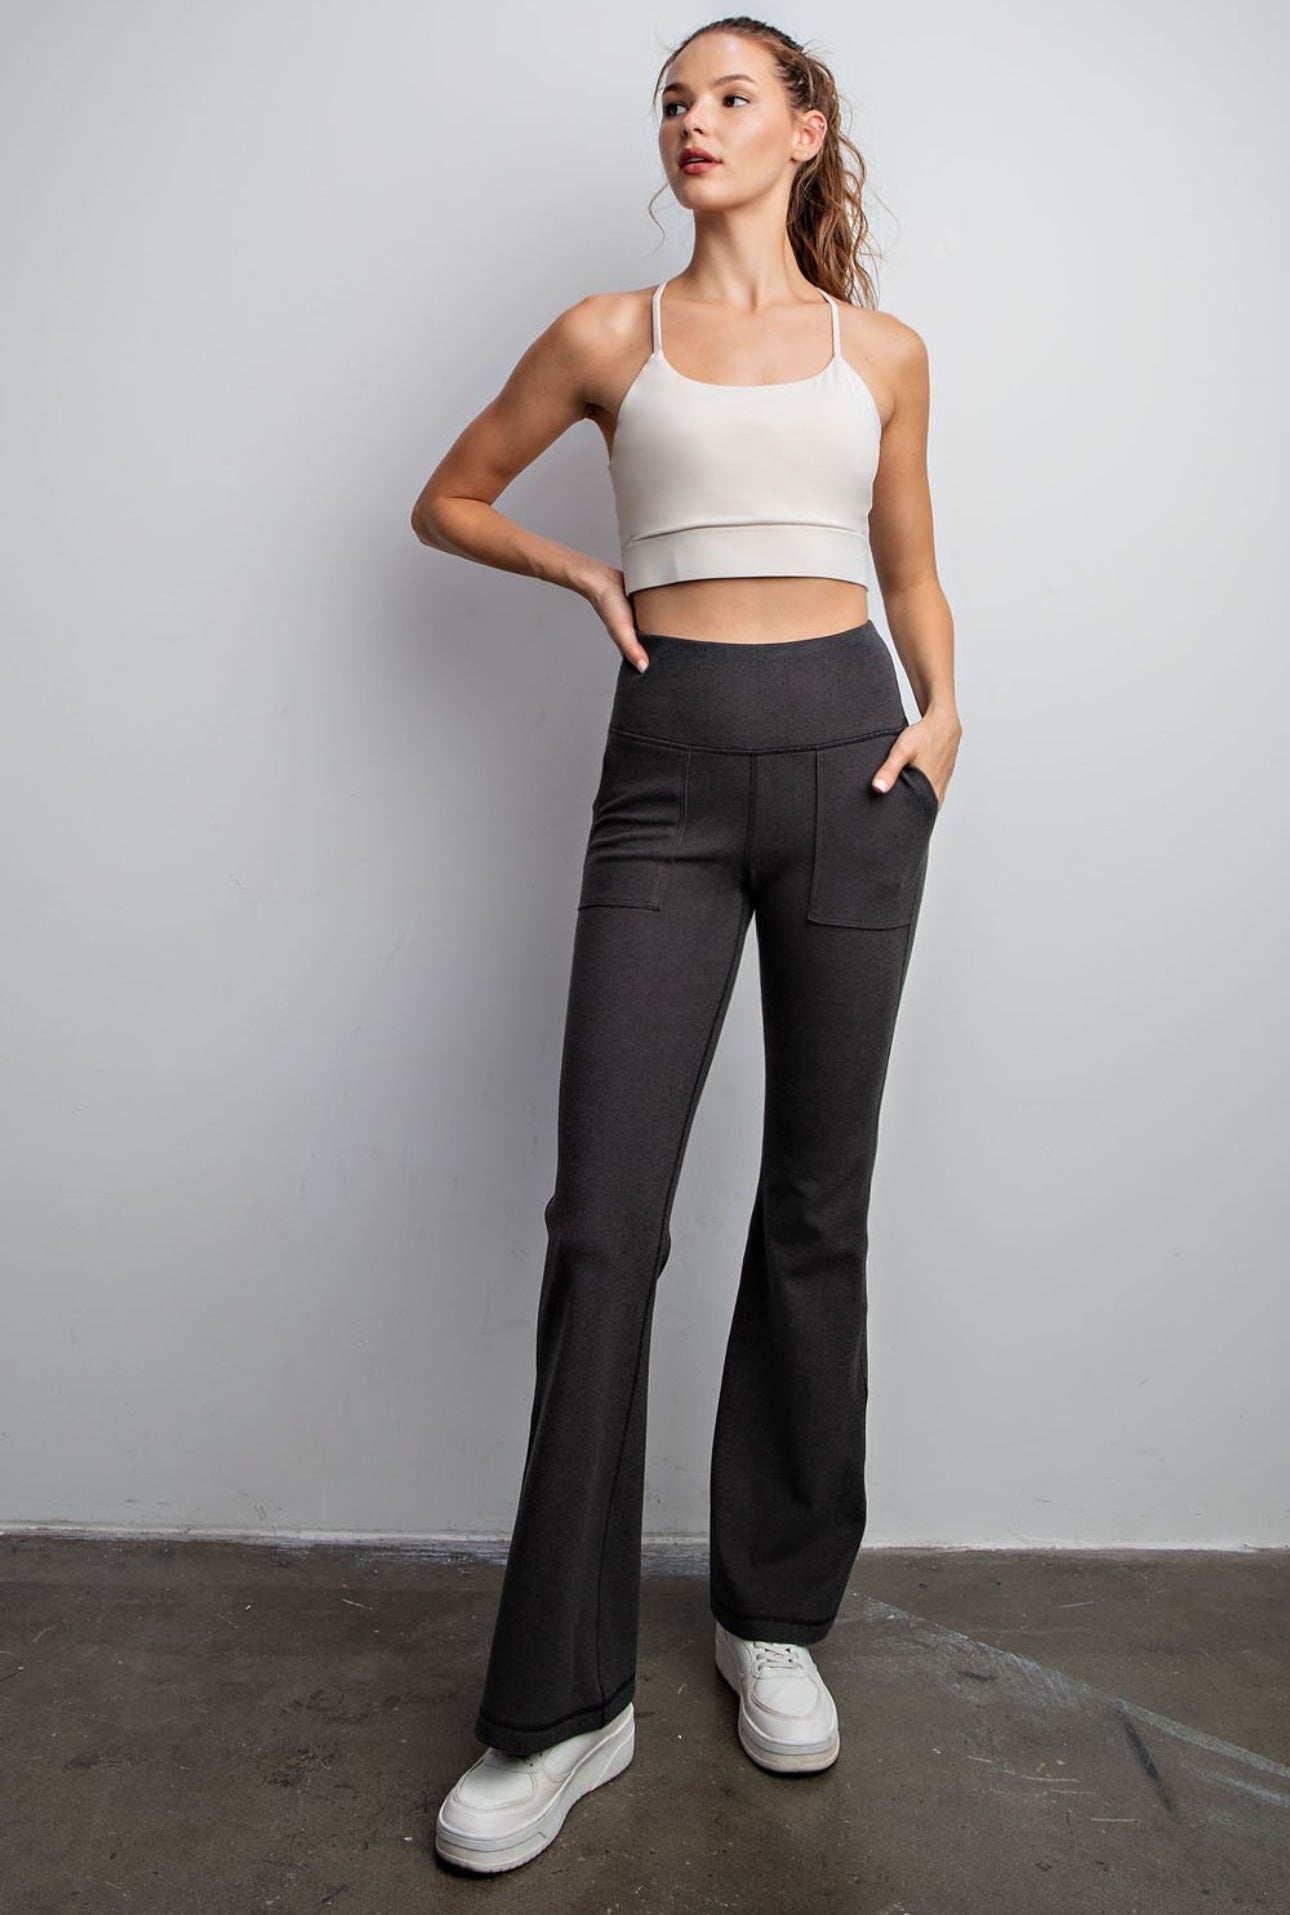 Wind Down Black Ribbed High Rise Bell Bottom Pants With Side Pocket